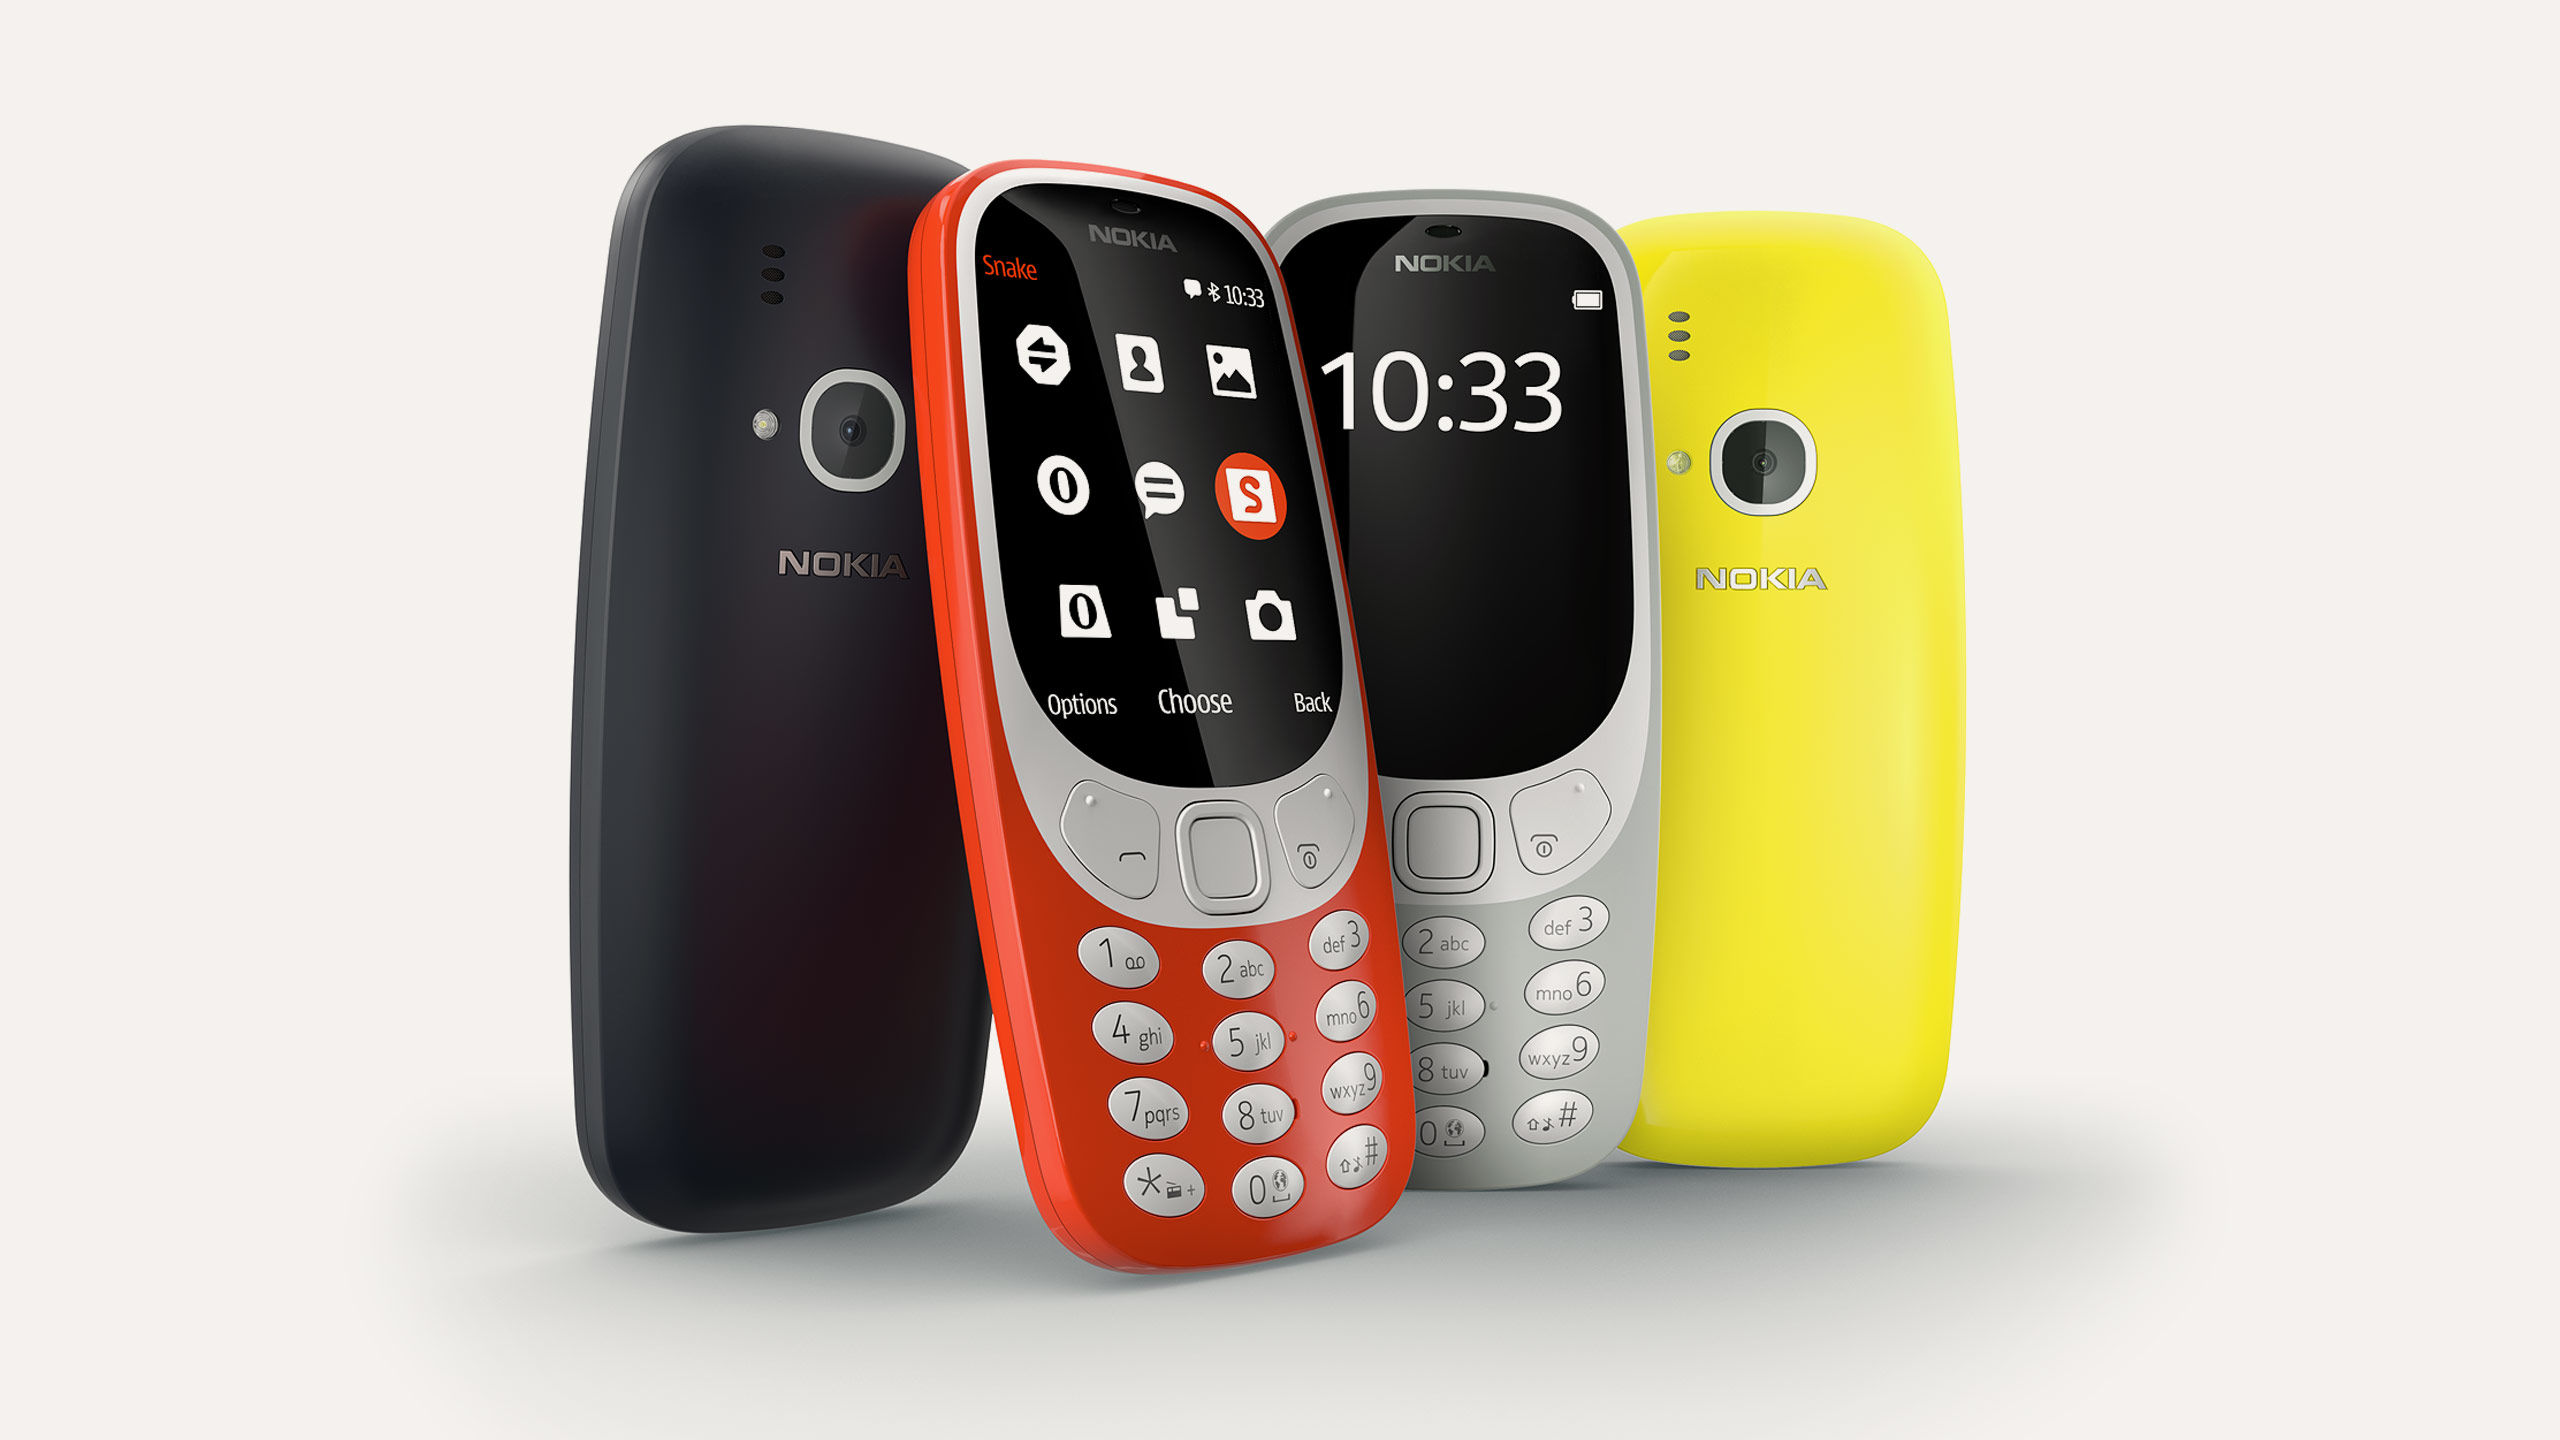 New Nokia 3310 to be released in June